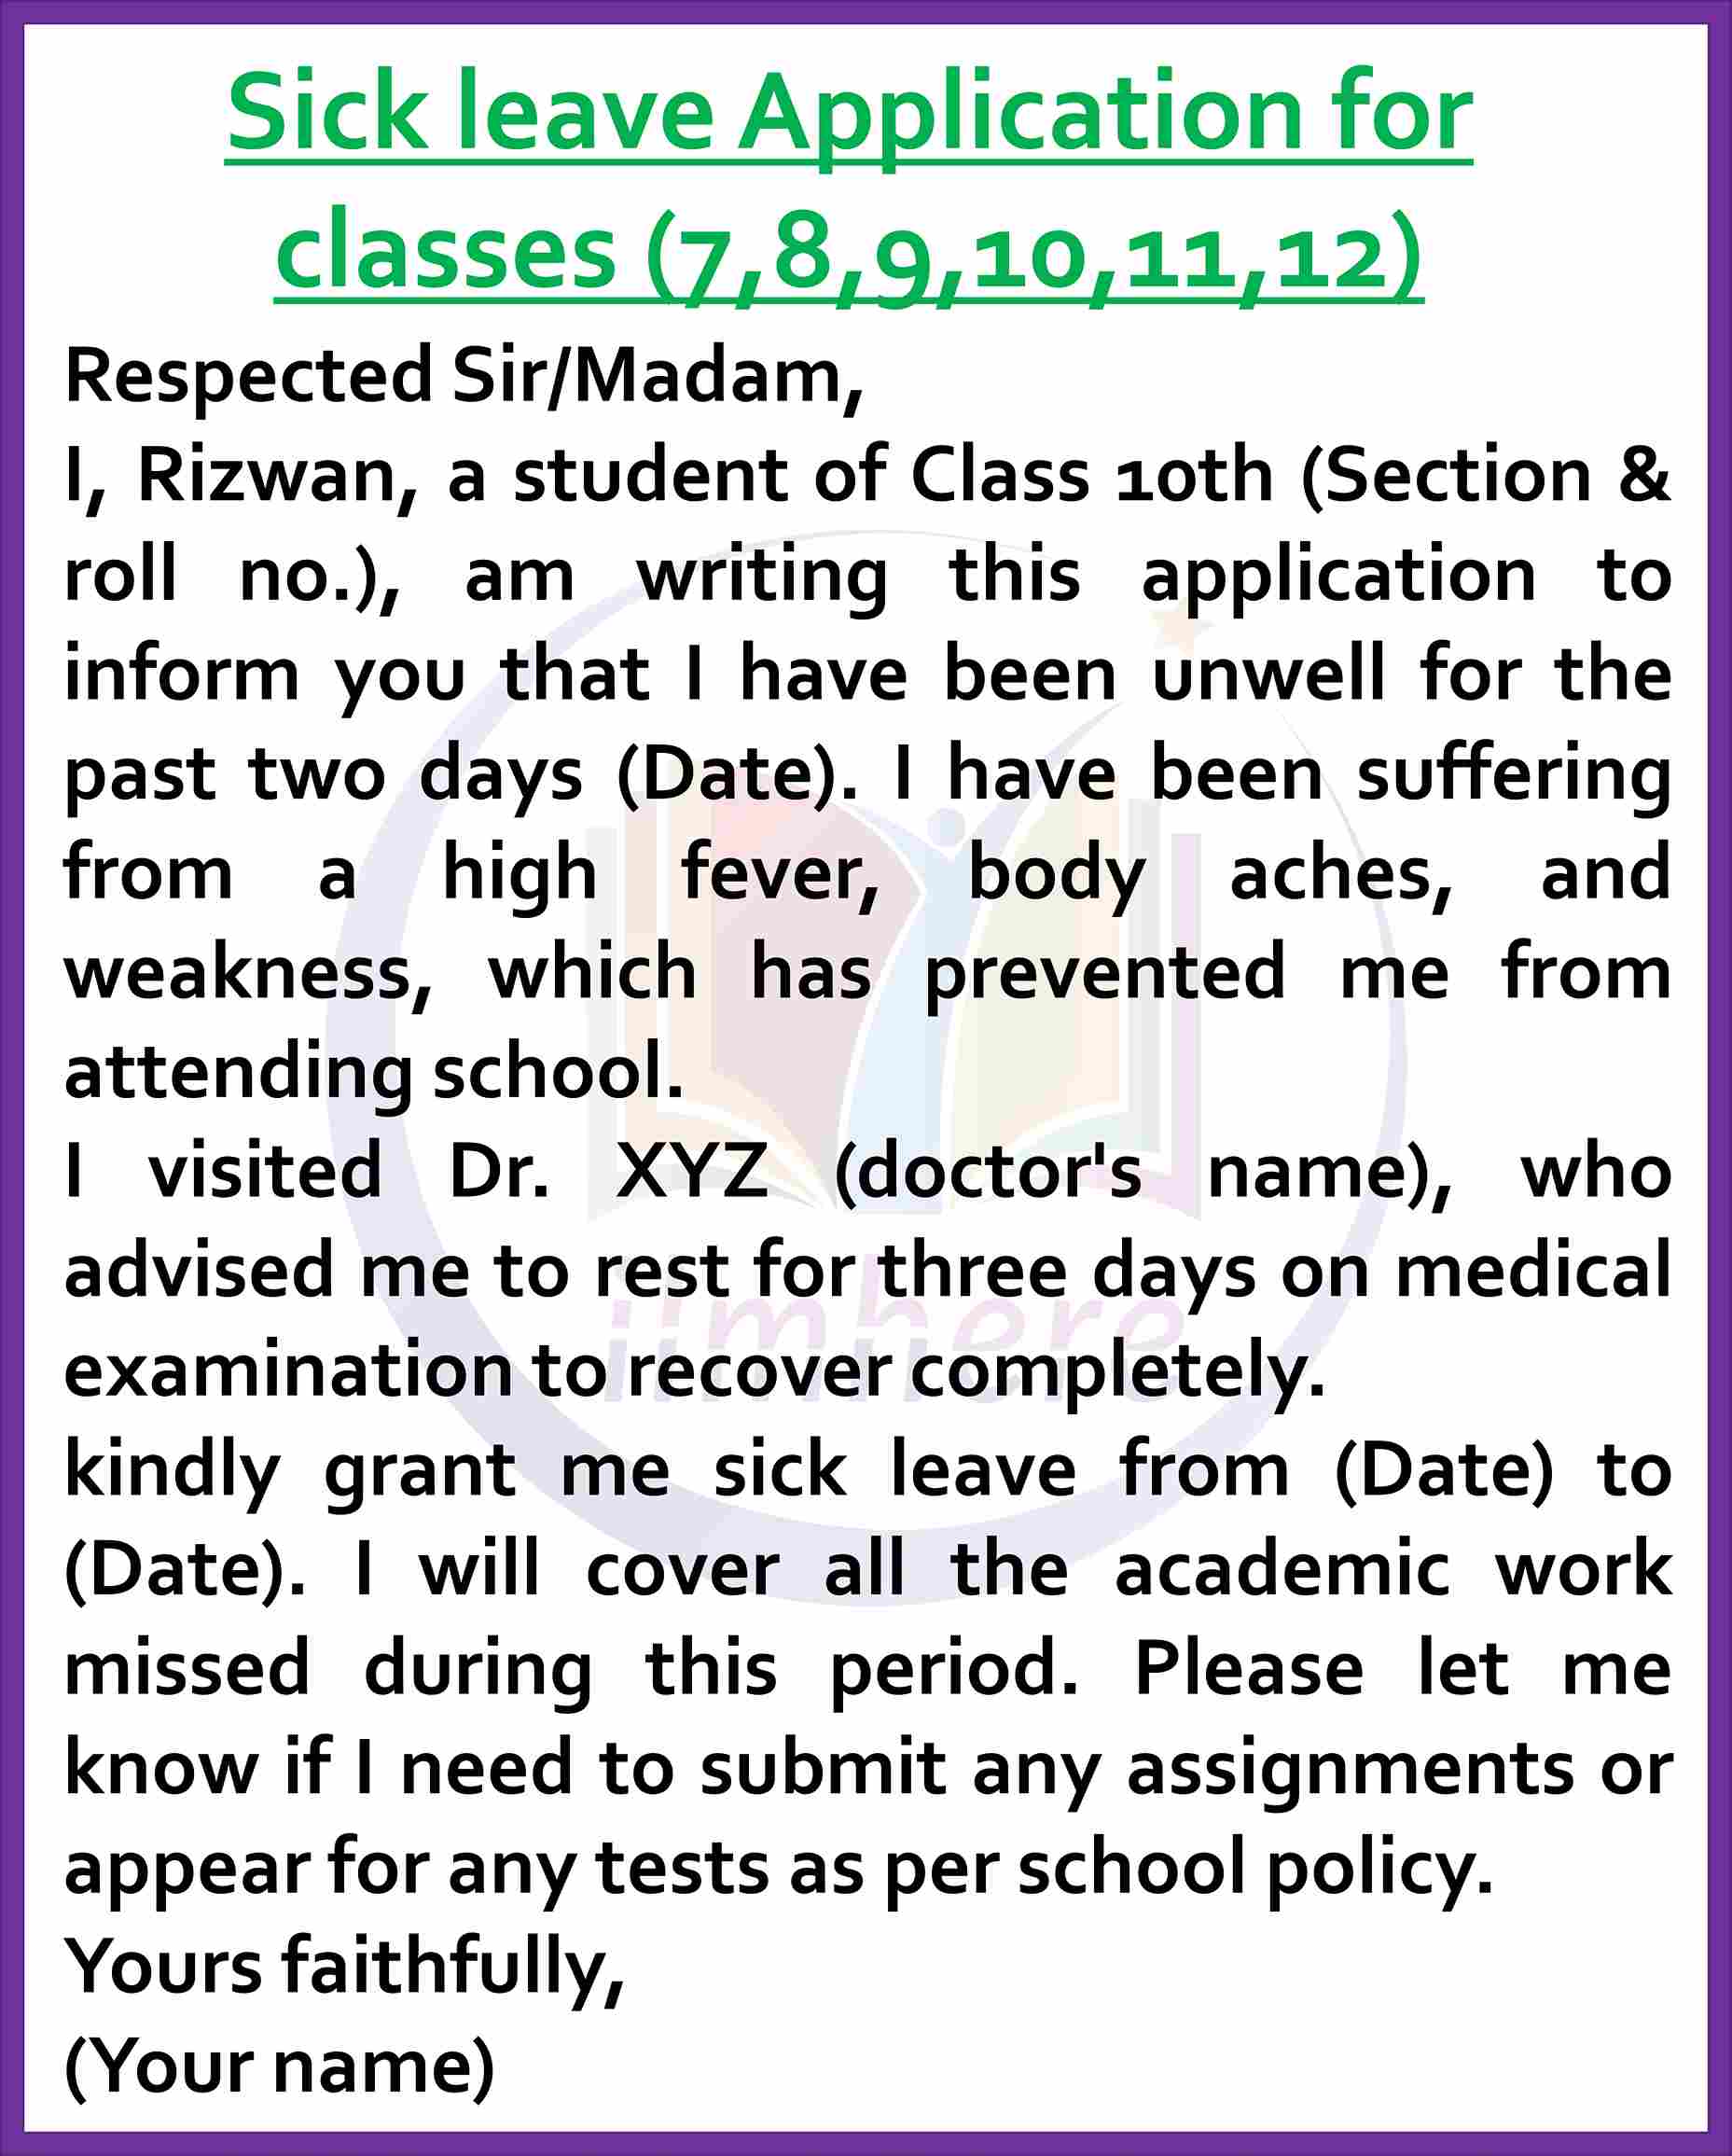 Sick leave application for classes 7 to 12